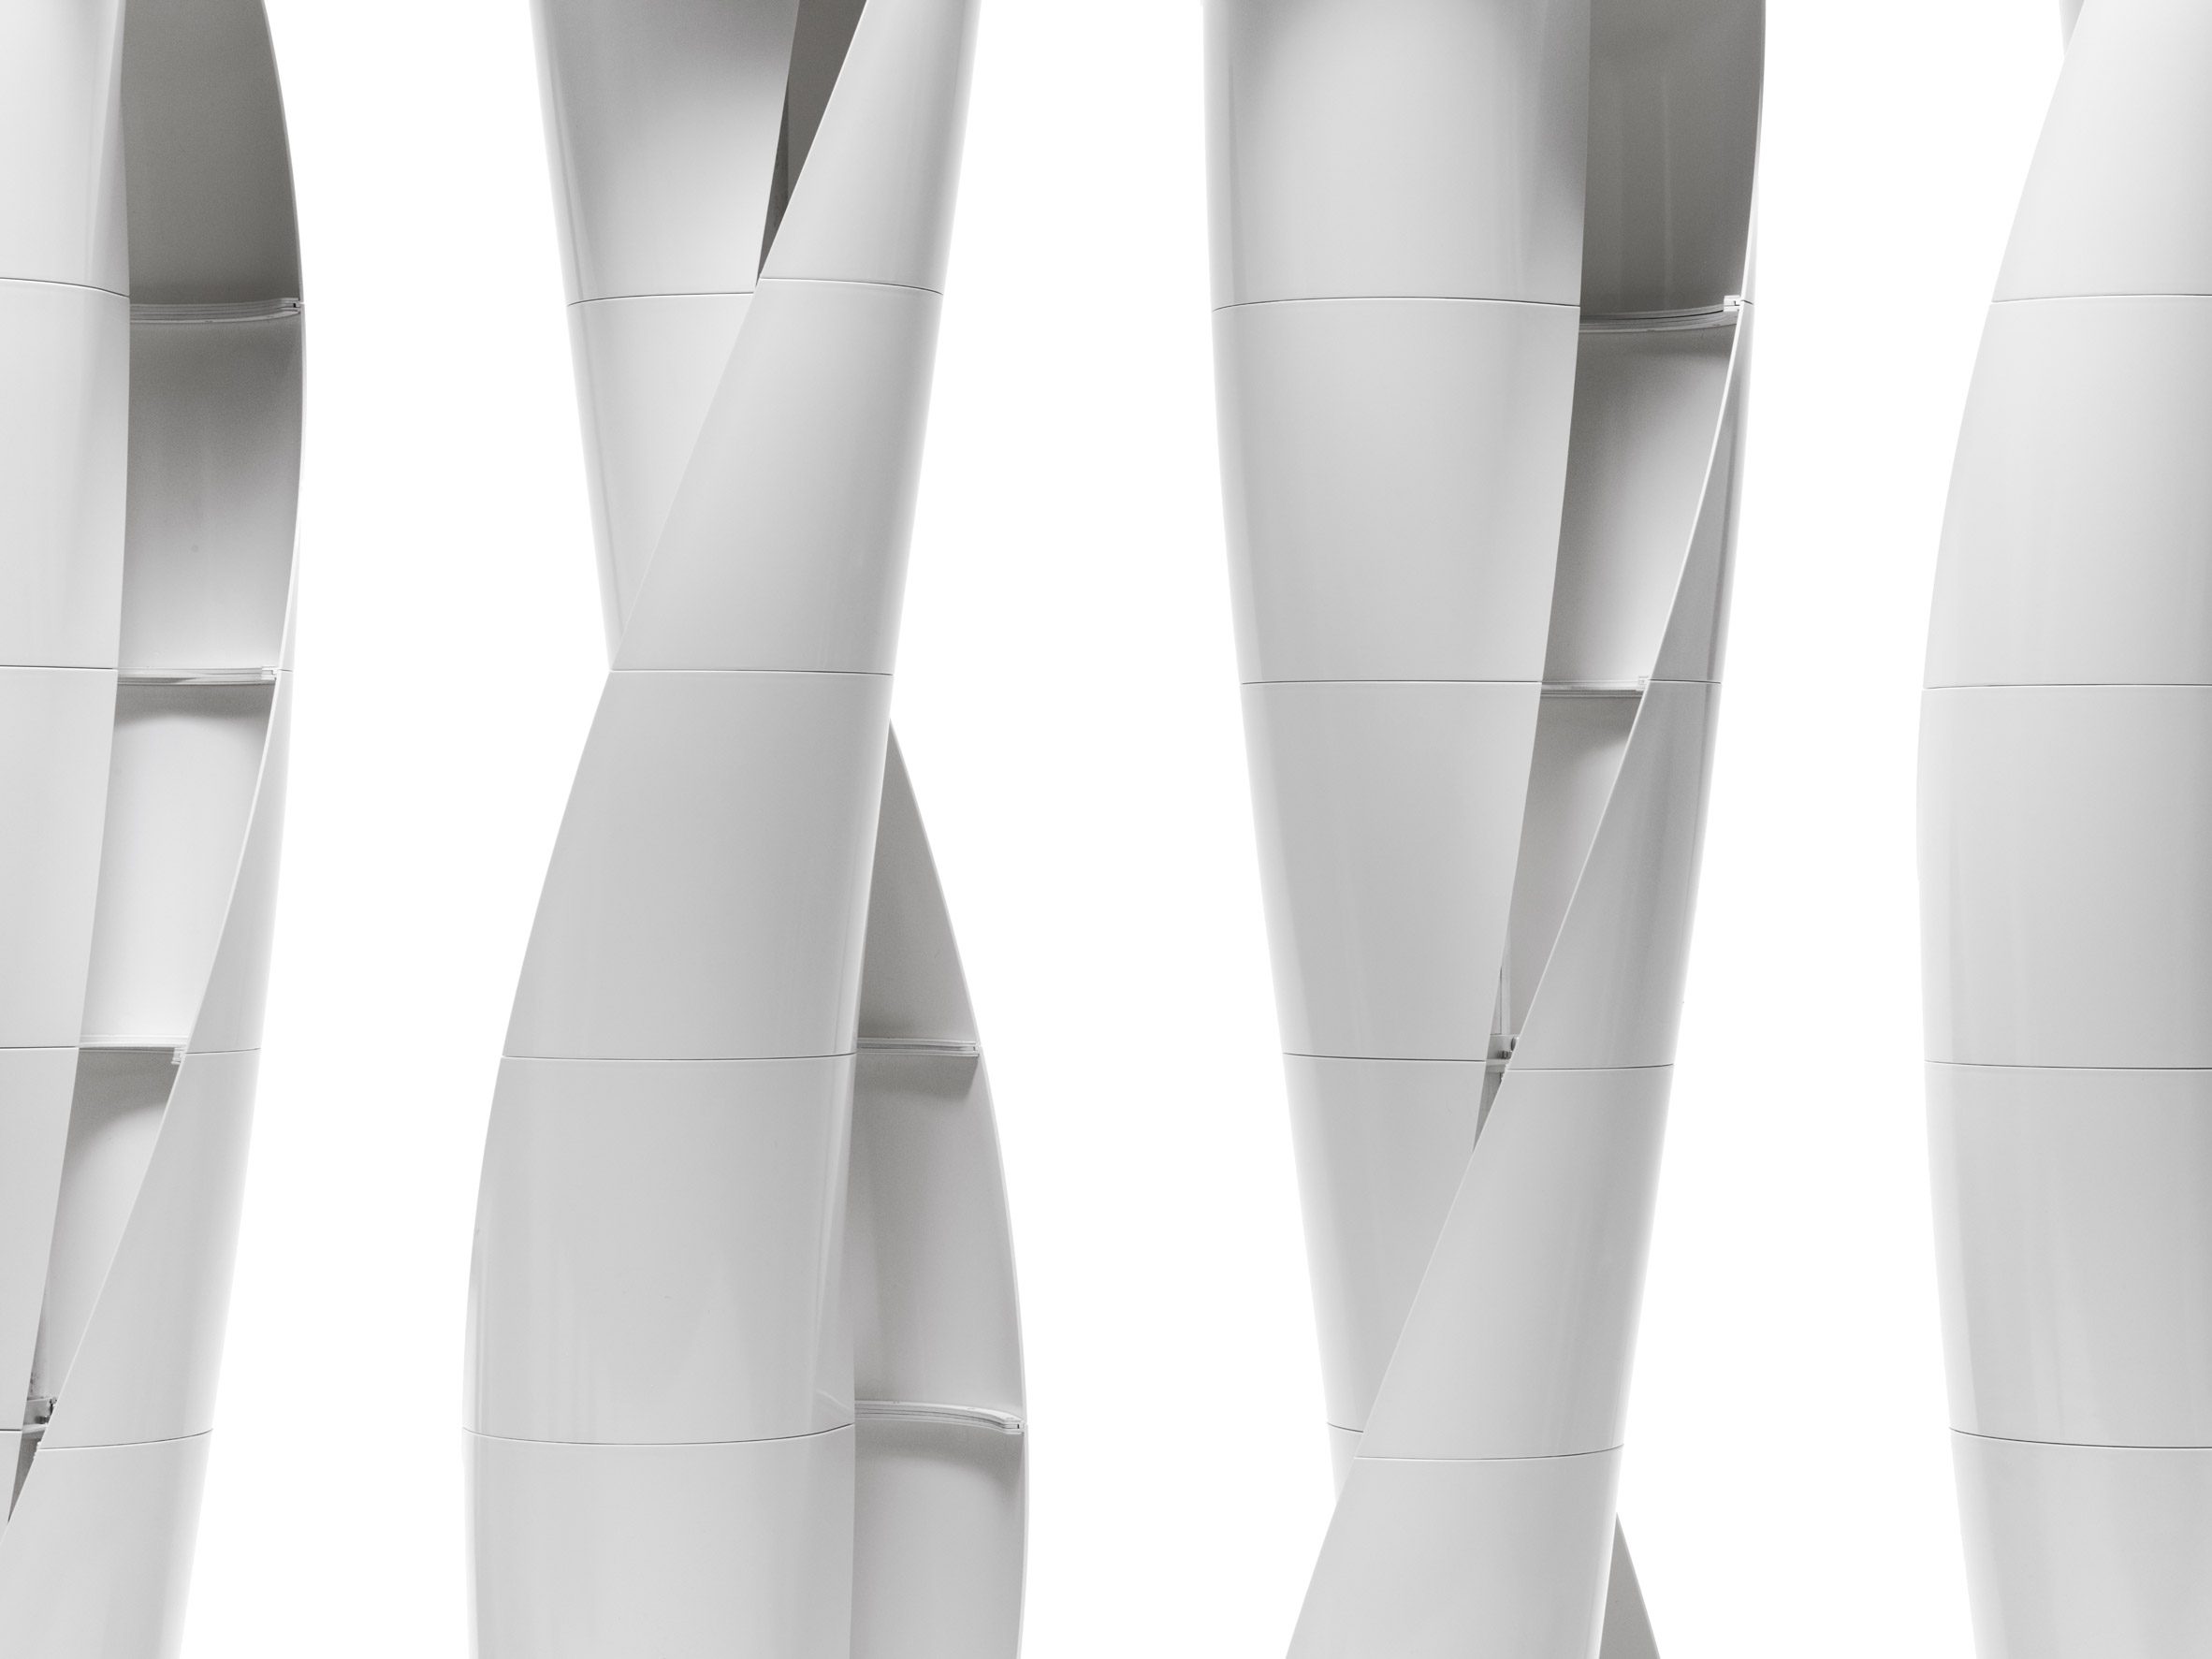 Rendering of smooth, white helix-shaped turbine blades spinning at different positions